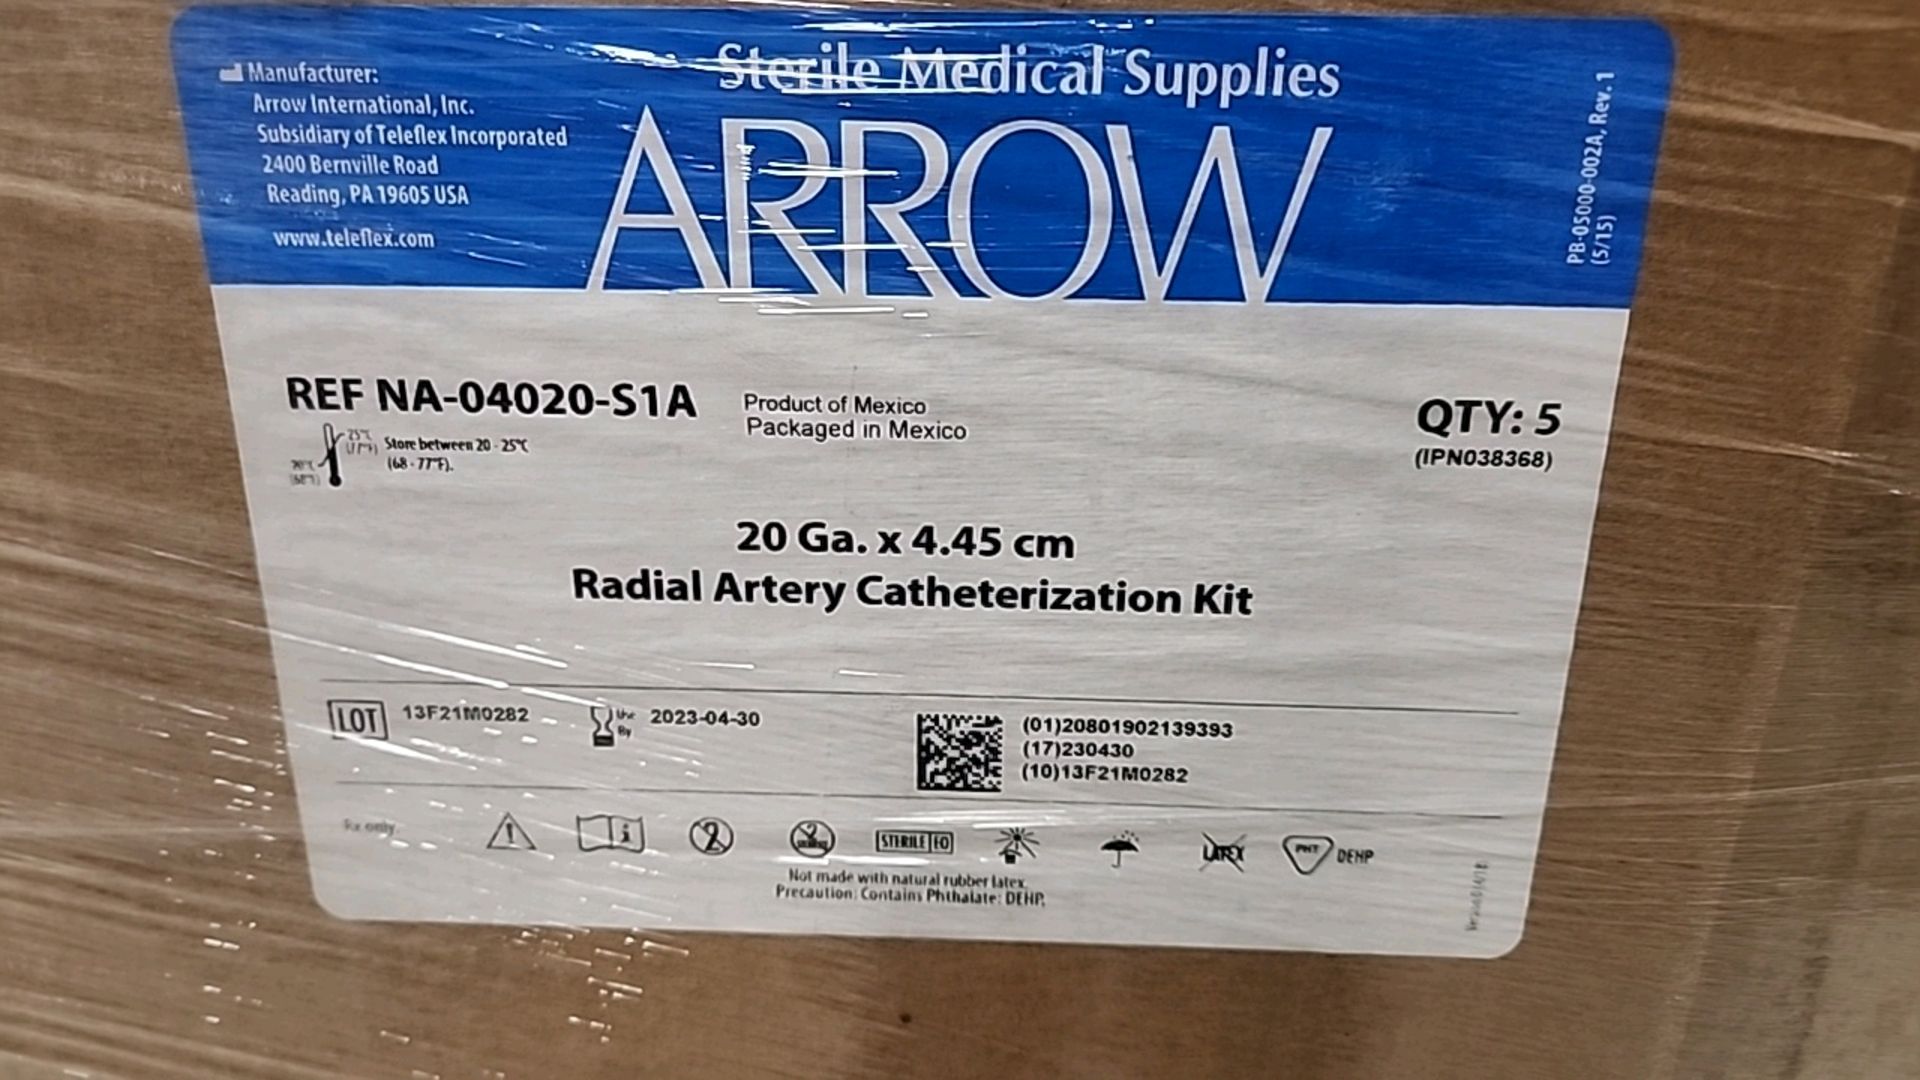 ARROW REF NA-04020-S1A RADIAL ARTERY CATHERIZATION KIT (NOT IN DATE) LOCATION: 100 GOLDEN DR. - Image 2 of 2